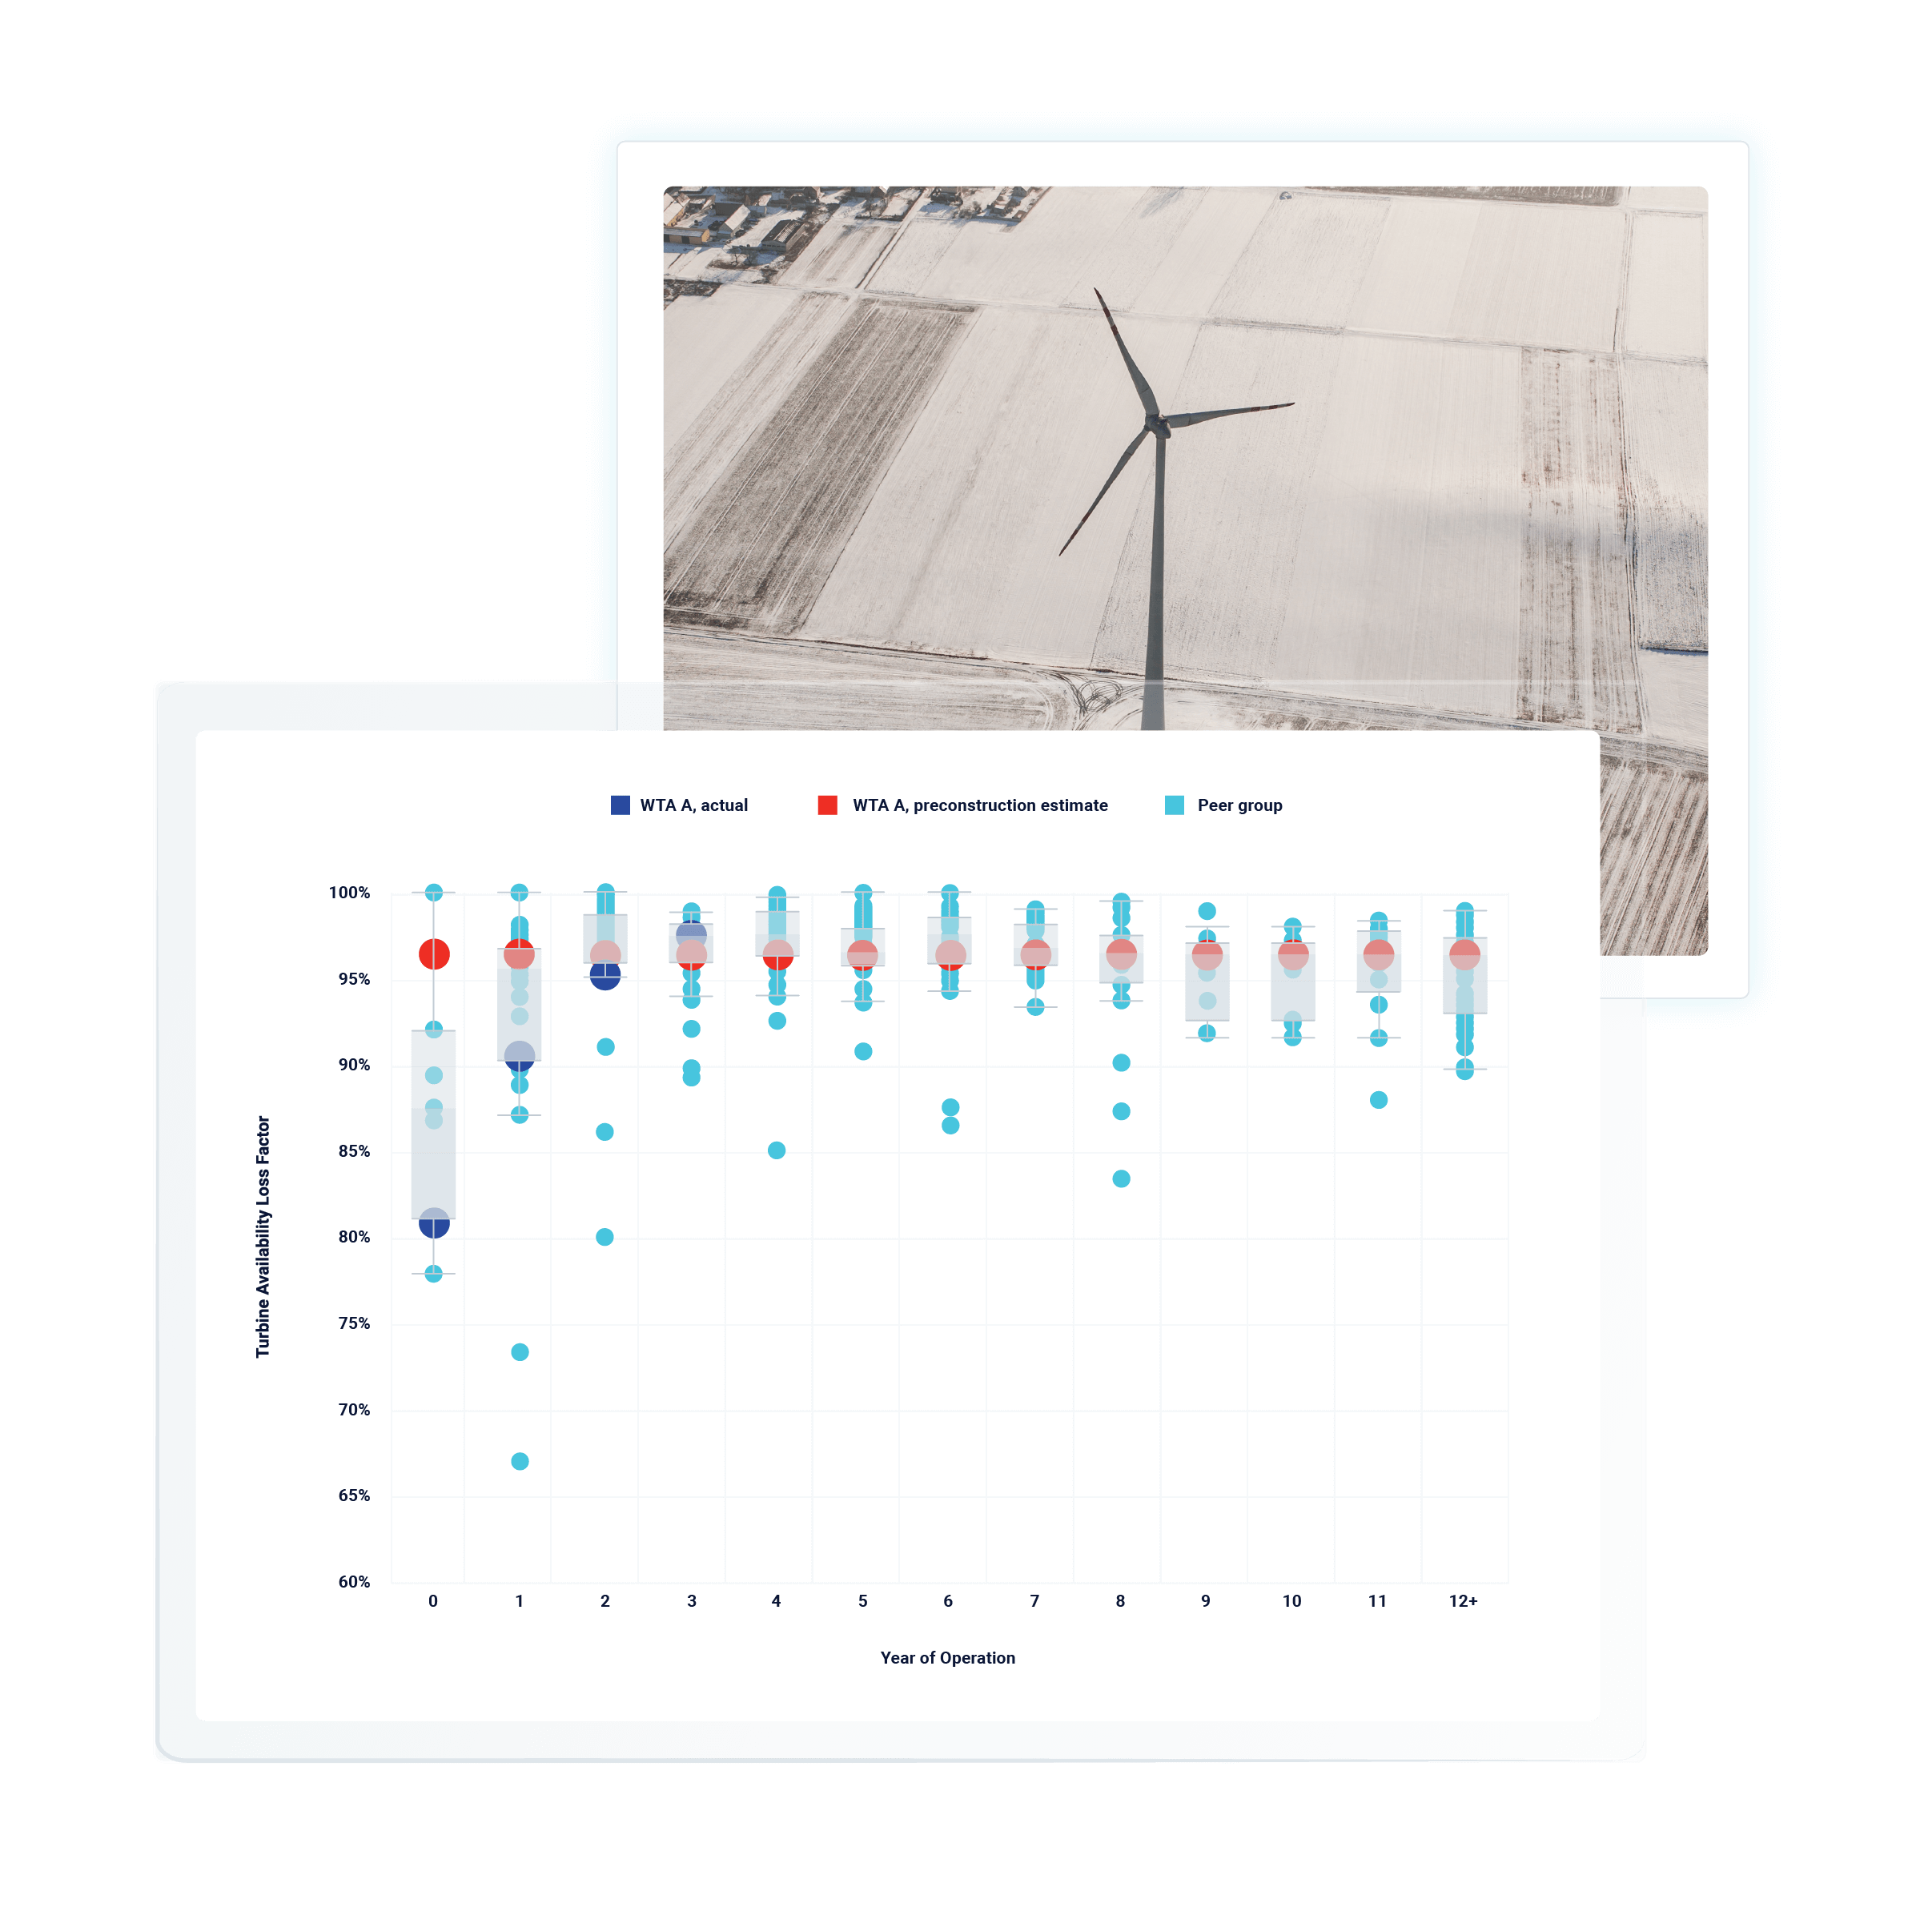 Image of a wind turbine in the snow with a graph of the benchmarked loss factors